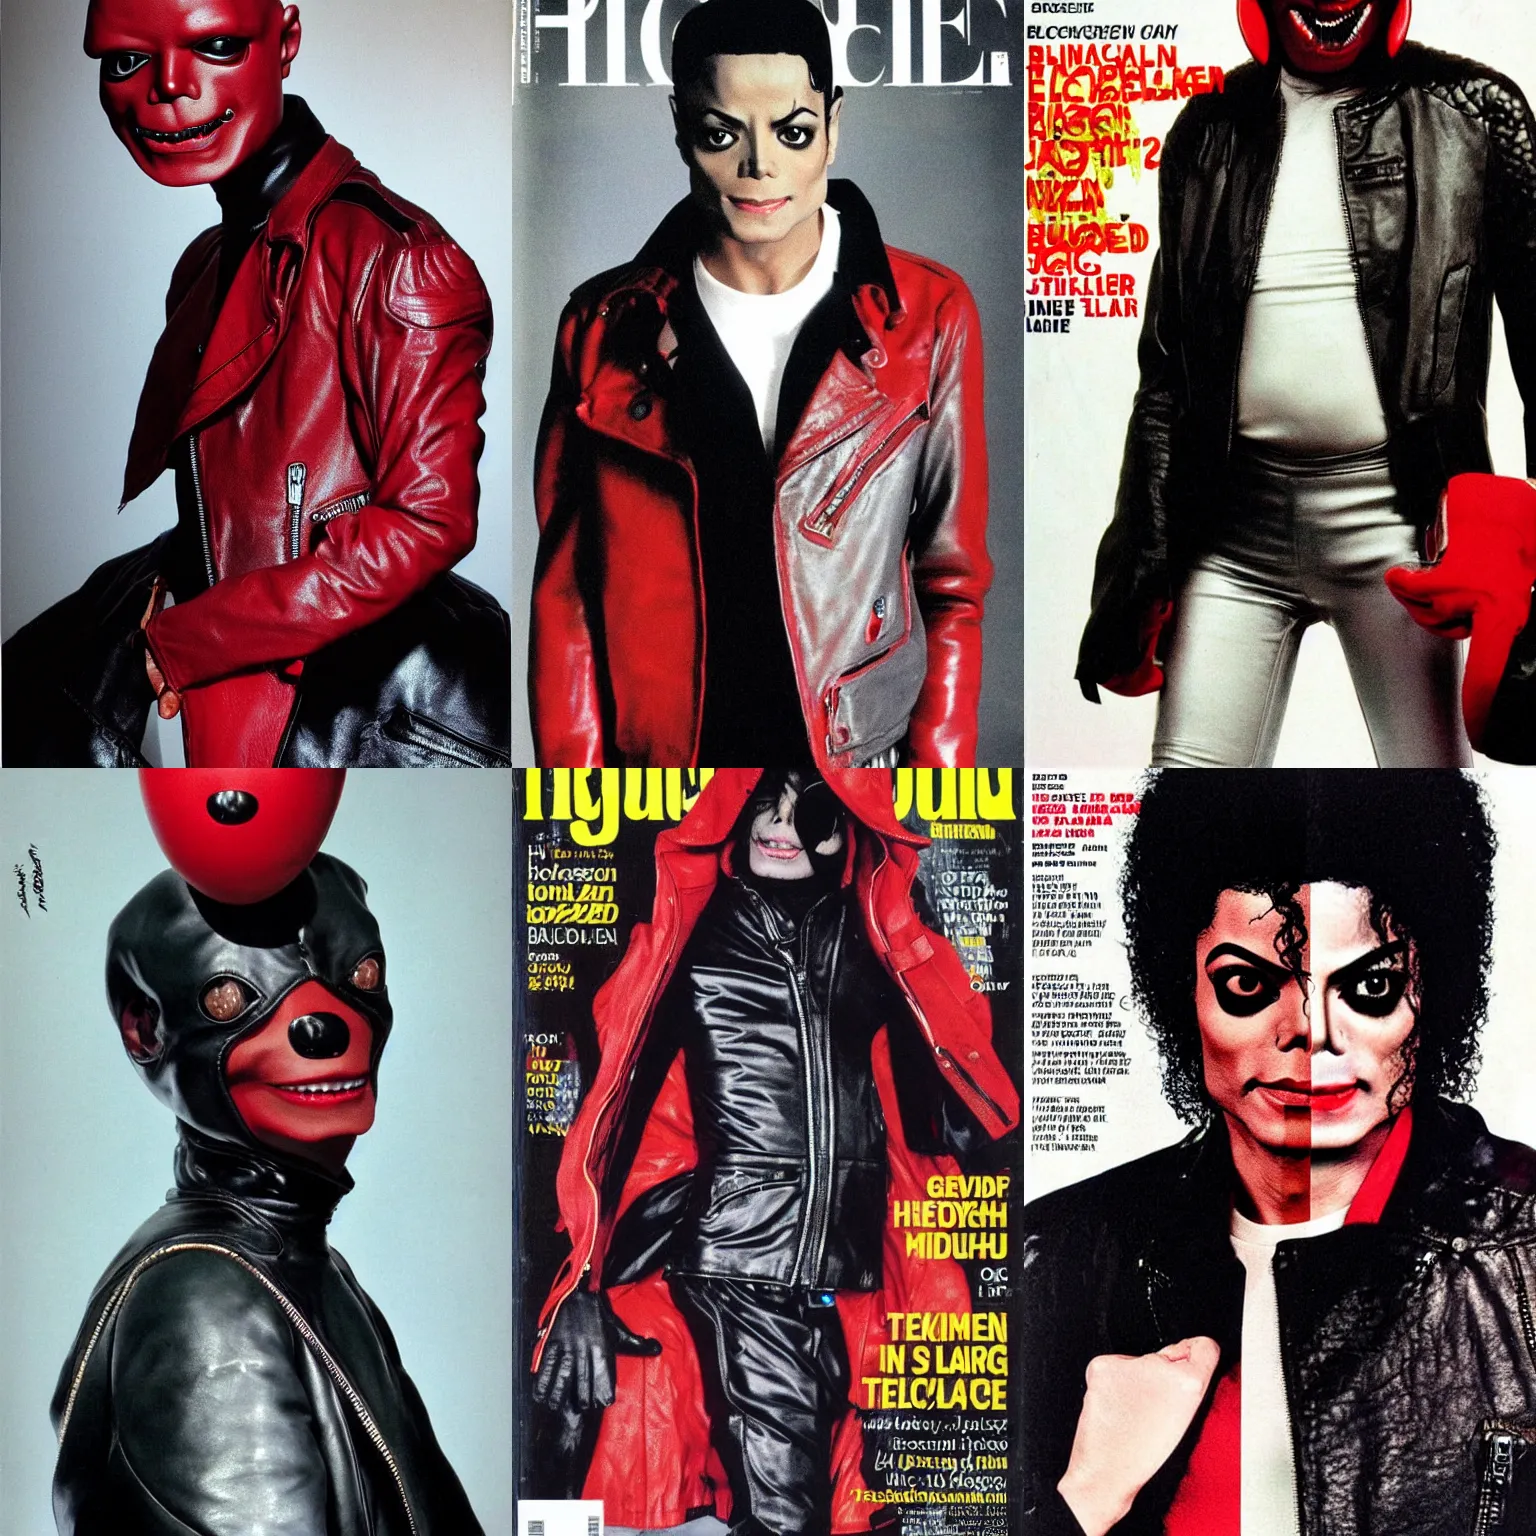 Prompt: bald michael jackson, with grey skin, huge bulbous pitch black eyes, sectoid, alien head, wearing the red leather motorcycle jacket from thriller, high fashion magazine cover.